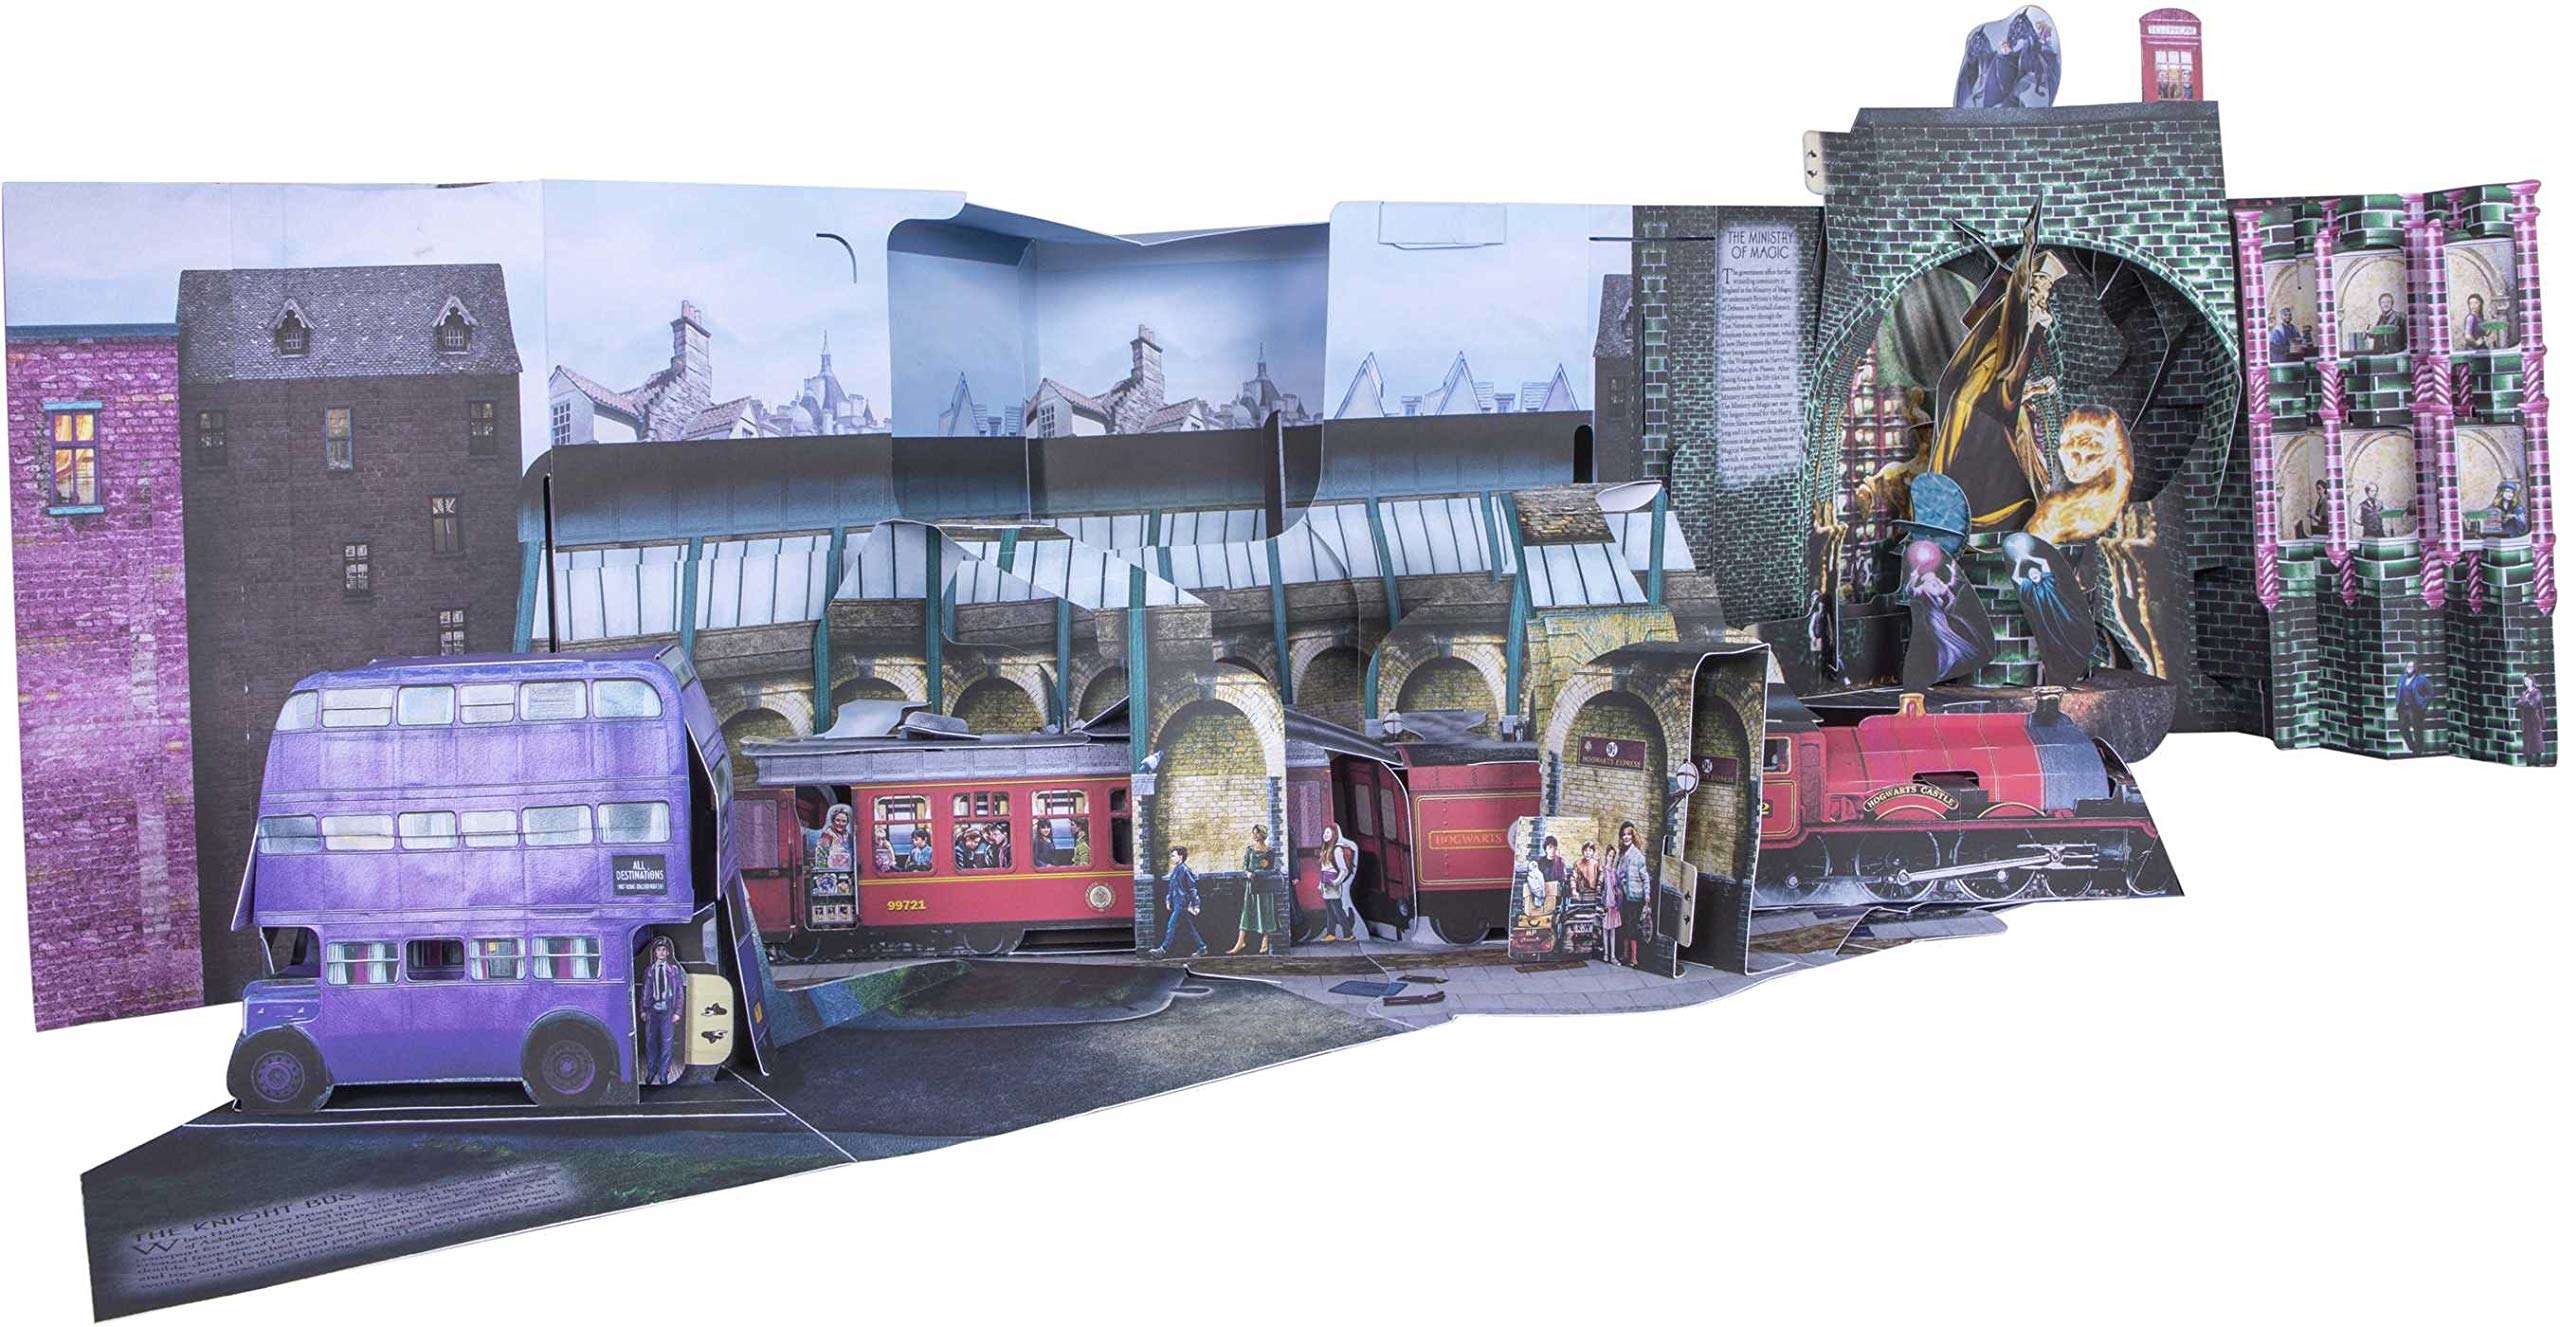 Insight Editions new Harry Potter Pop-Up Book Recreates Diagon Alley